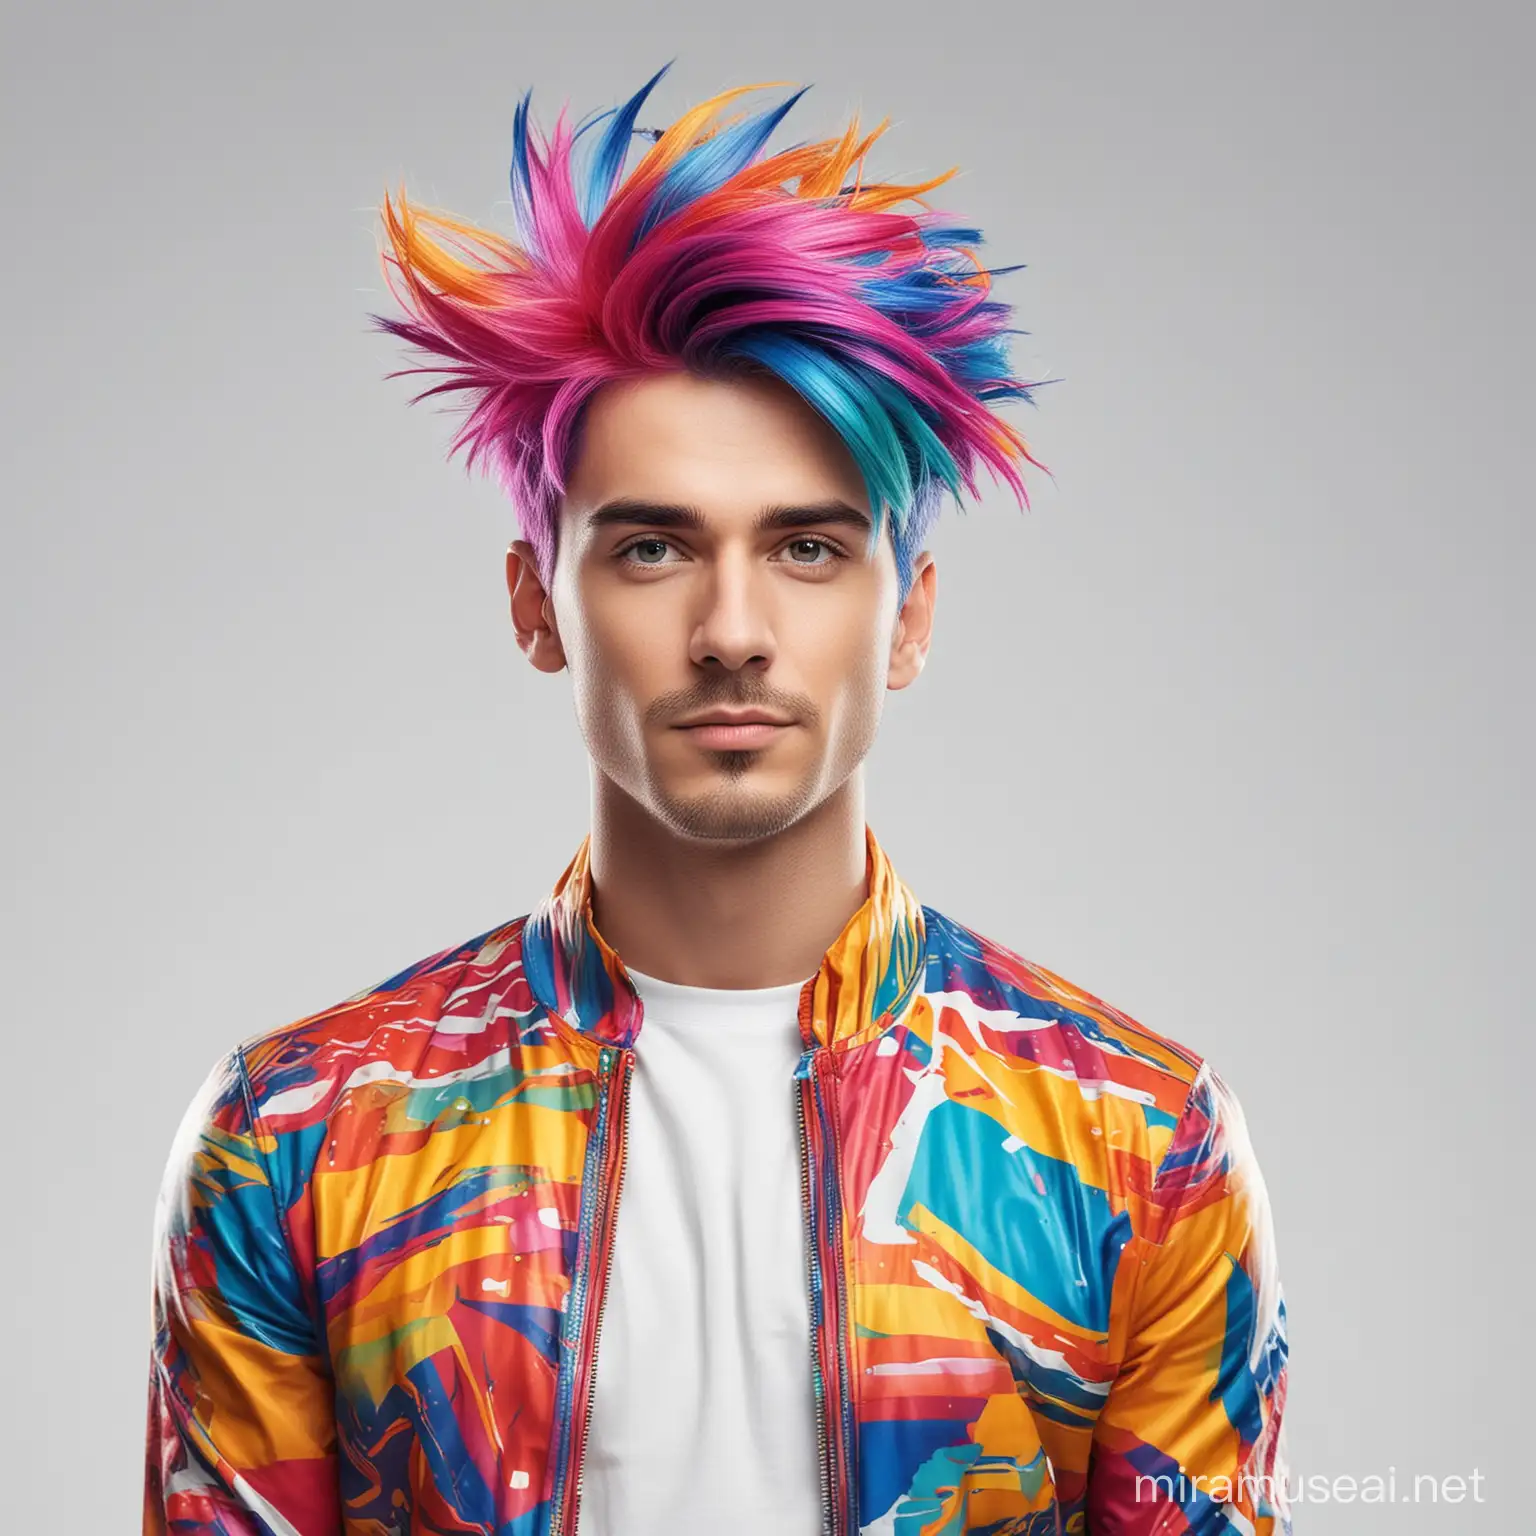 Create a 3d portrait (waist up) of man with colorful hair wearing artistic clothes on a  white background